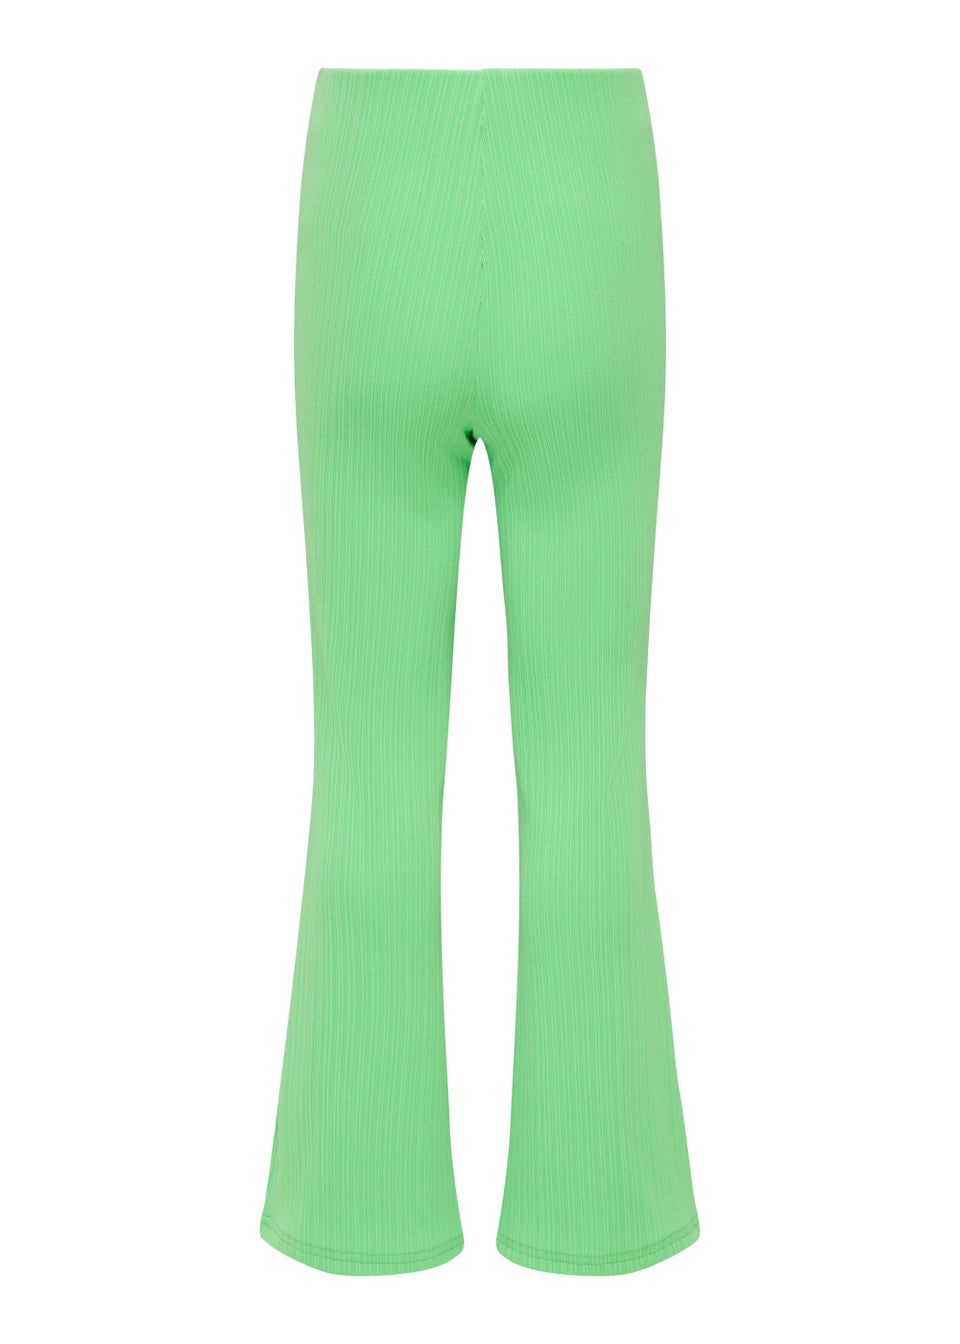 ONLY Girls Green Split Flared Trousers (6-14yrs)